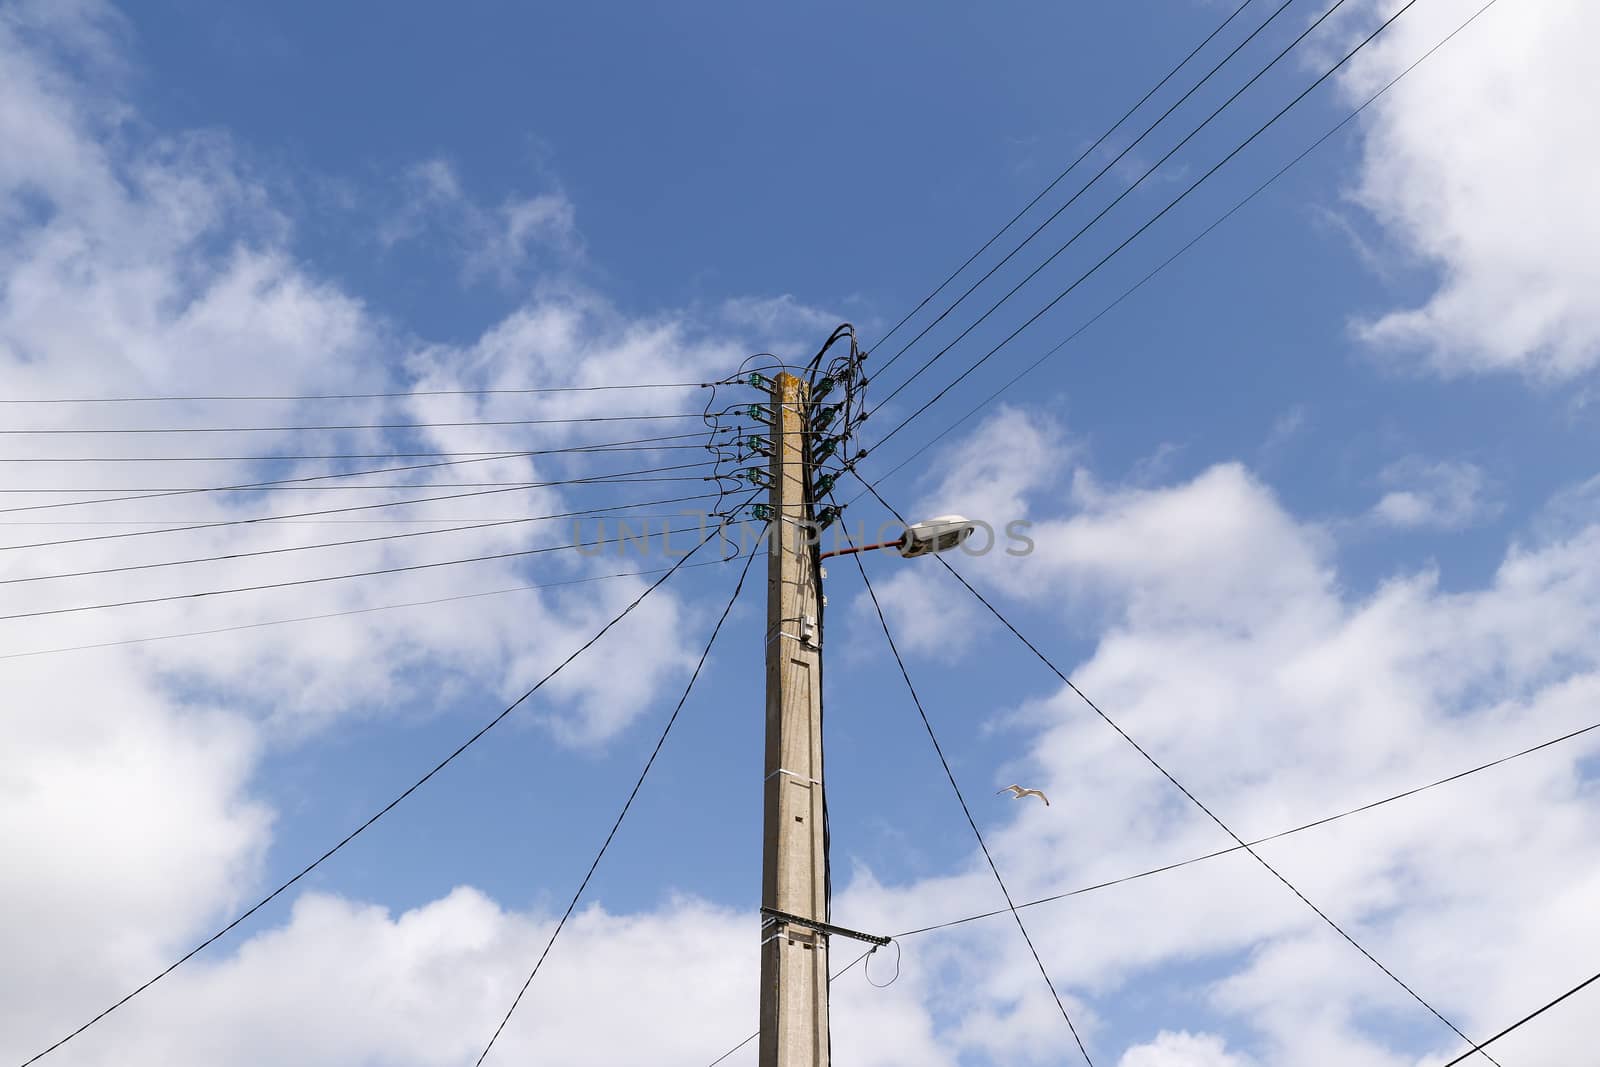 Detail of the power-transmission pole - electric power line